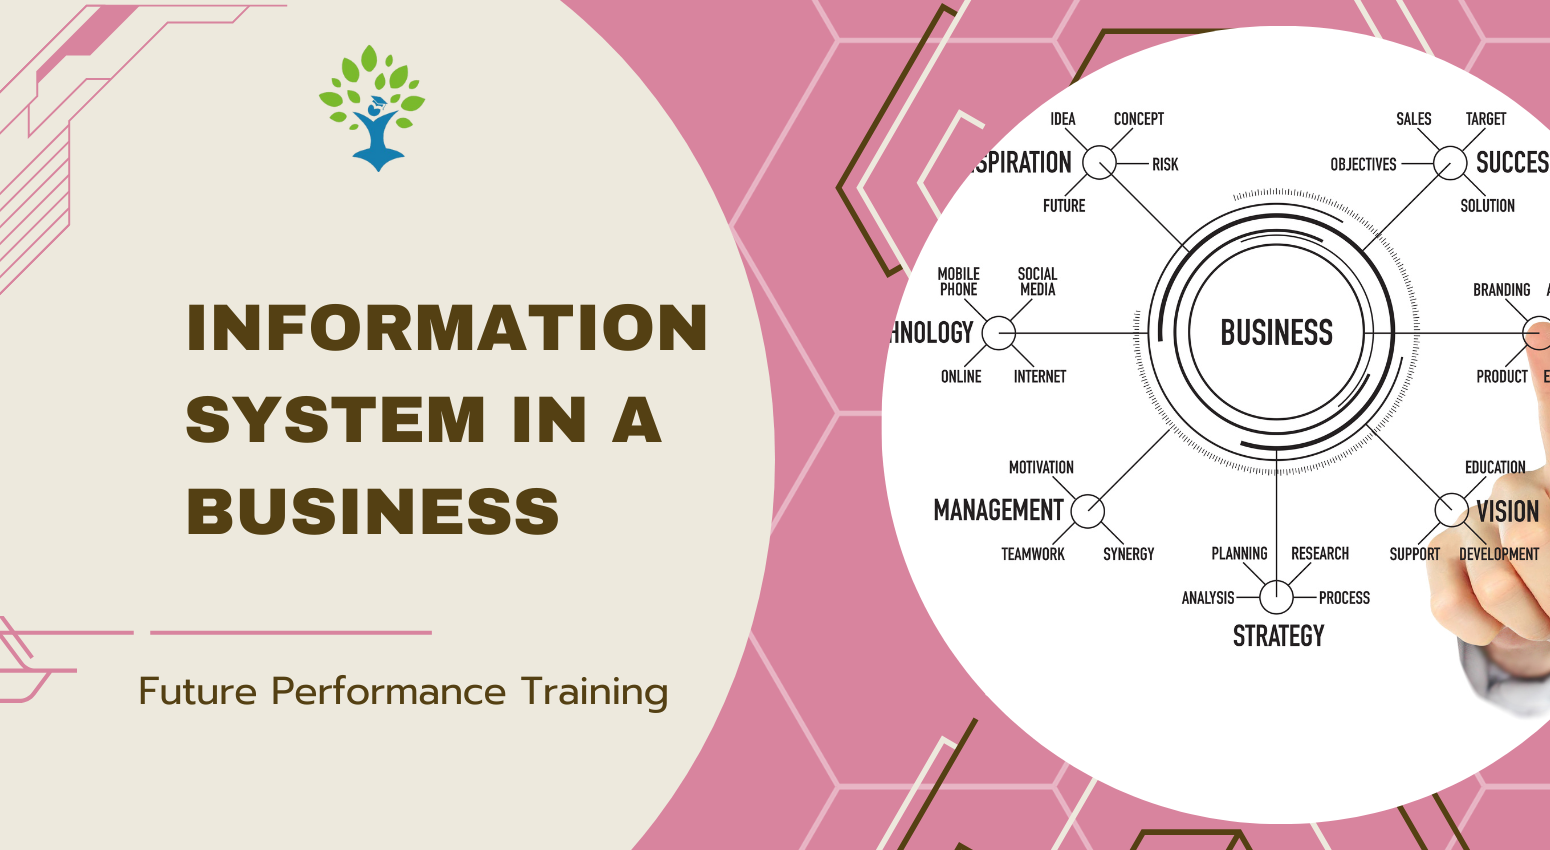 Information System in a Business 